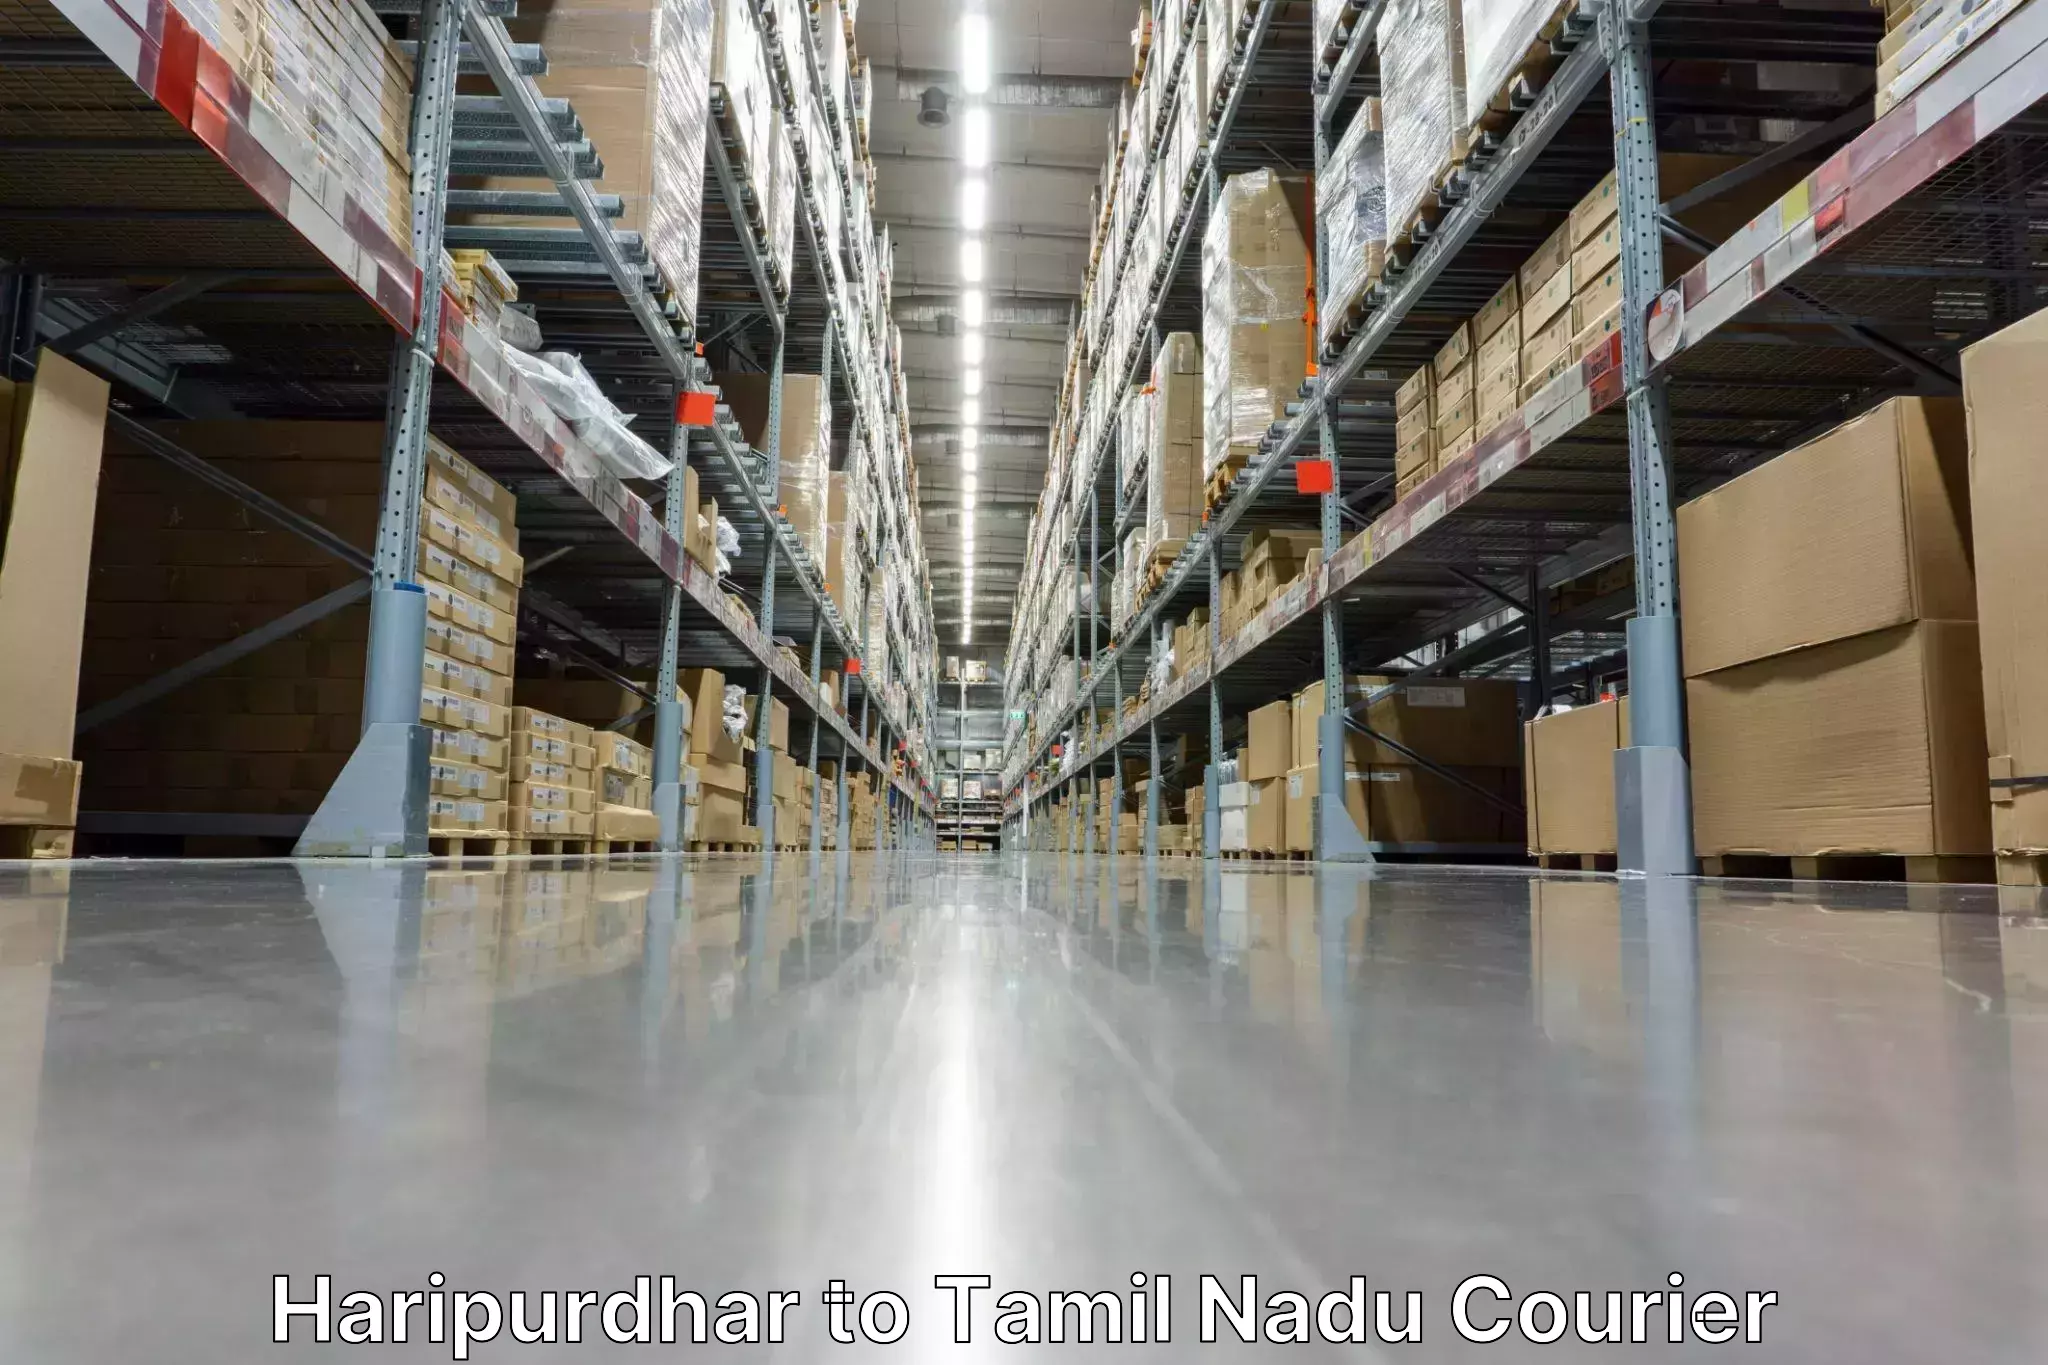 Courier dispatch services Haripurdhar to Thanjavur